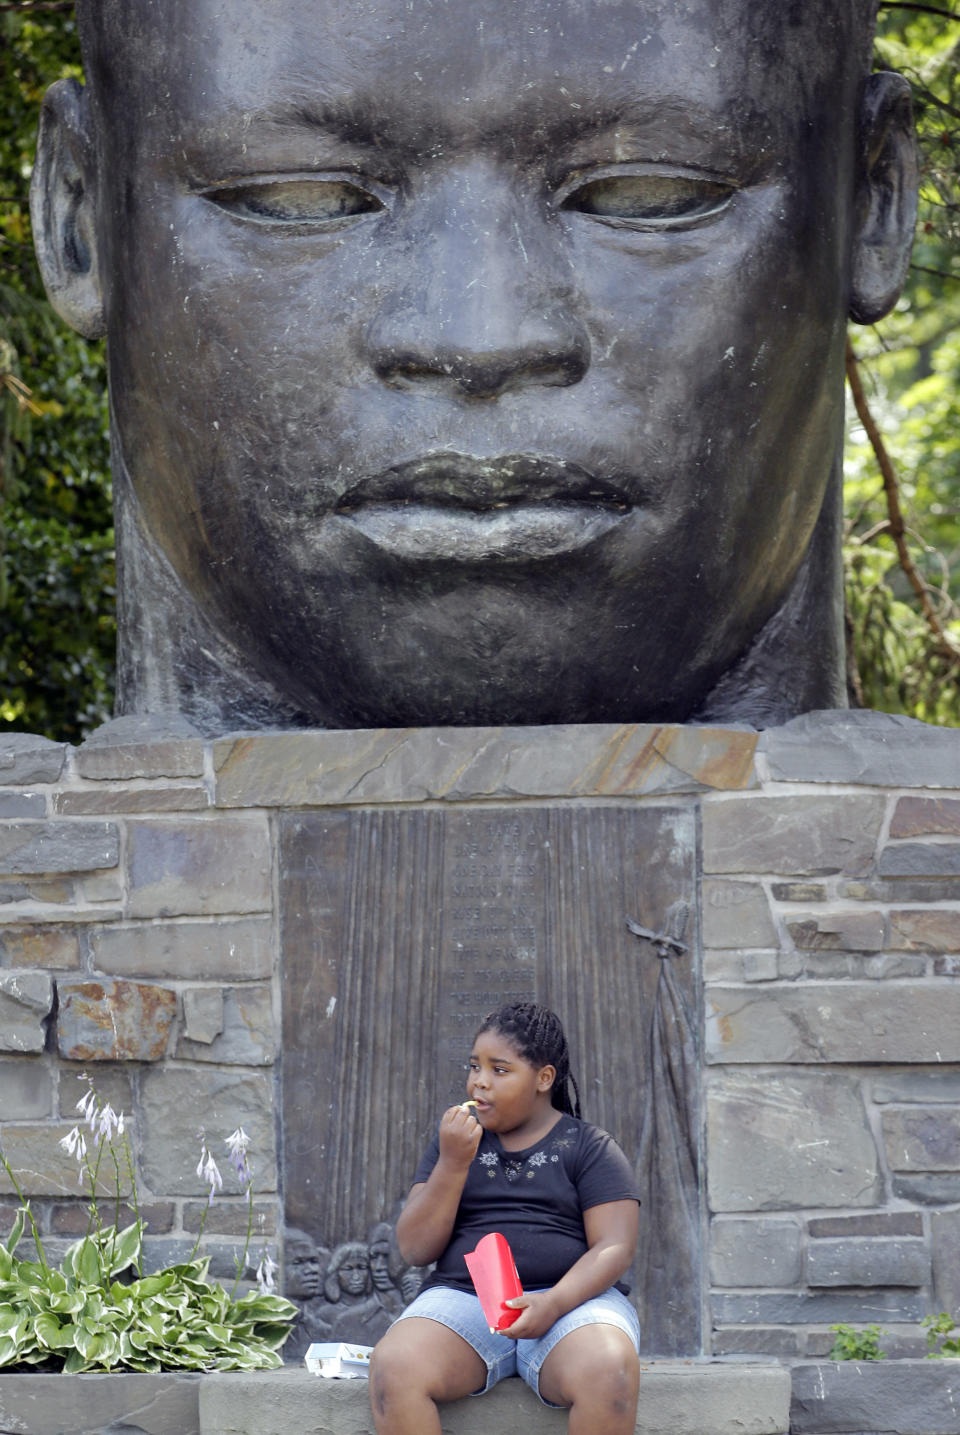 FILE - In this July 13, 2012 file photo, Tonae Johnson eats her lunch in the park in front of a Martin Luther King Jr. statue during the warm summer weather in Buffalo, N.Y. A community activist says he has gathered more than 6,000 signatures to replace the sculpture of the civil rights leader. Samuel Herbert says his goal is to get 10,000 signatures and a new statue by 2020. He says the 8-foot bust of King that sits in a namesake park in Buffalo doesn't look like the civil rights leader. (AP Photo/David Duprey, File)